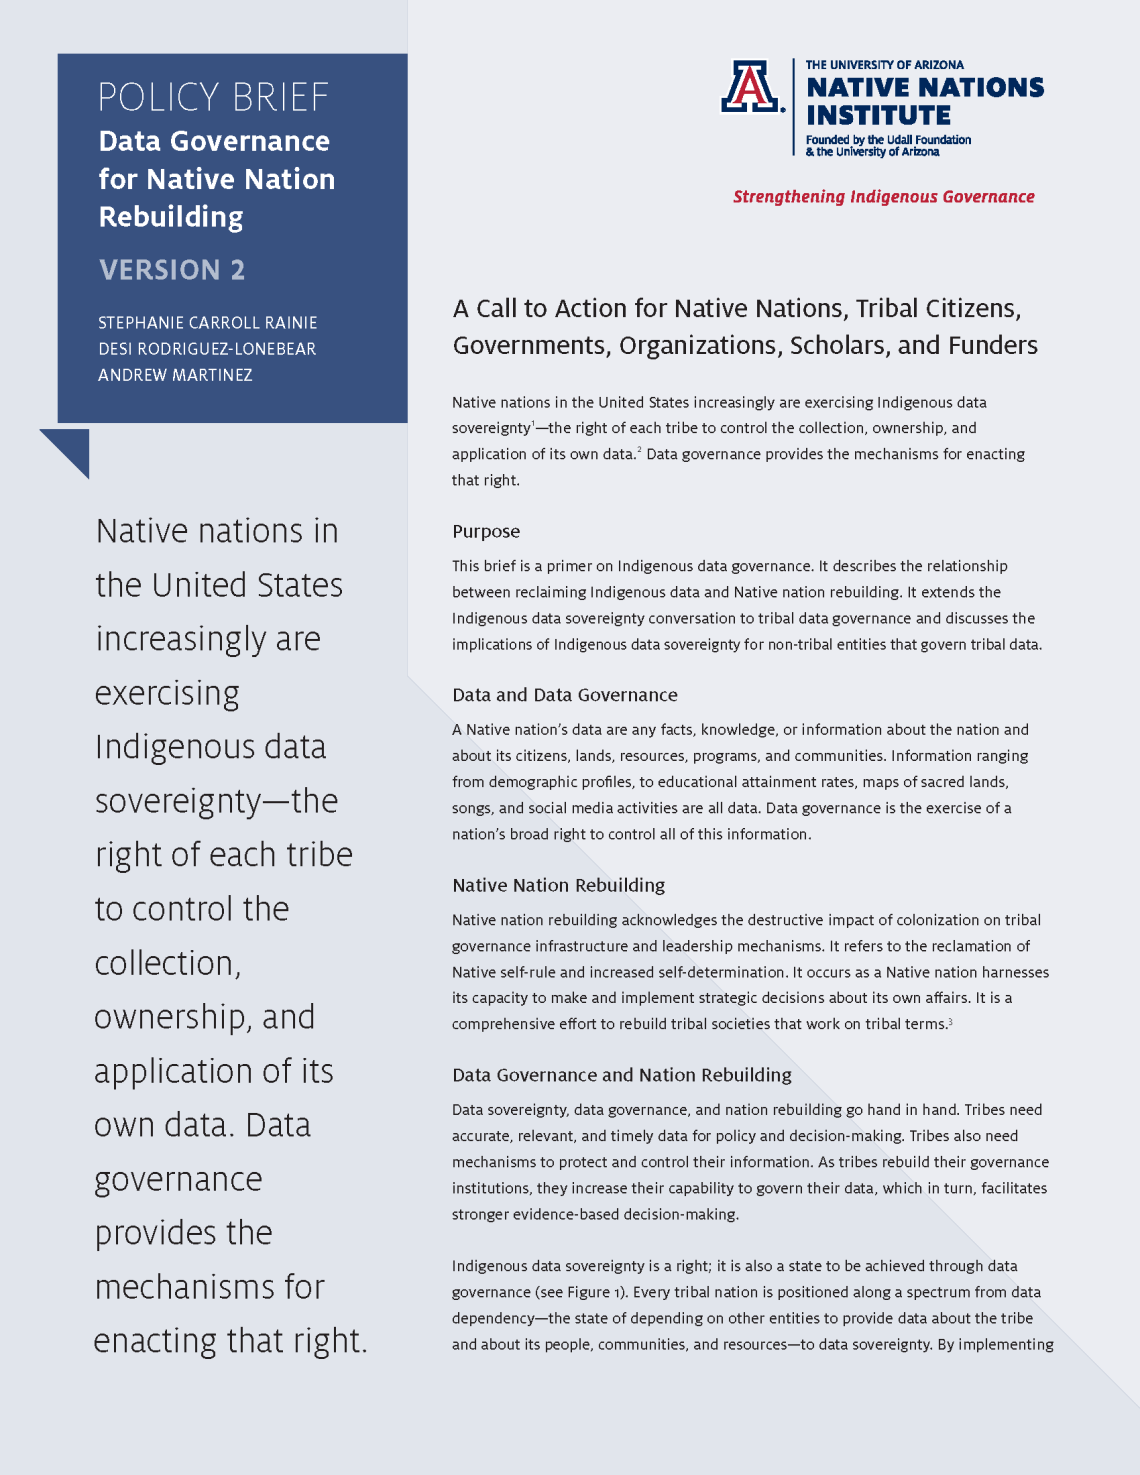 Policy Brief: Data Governance for Native Nation Rebuilding